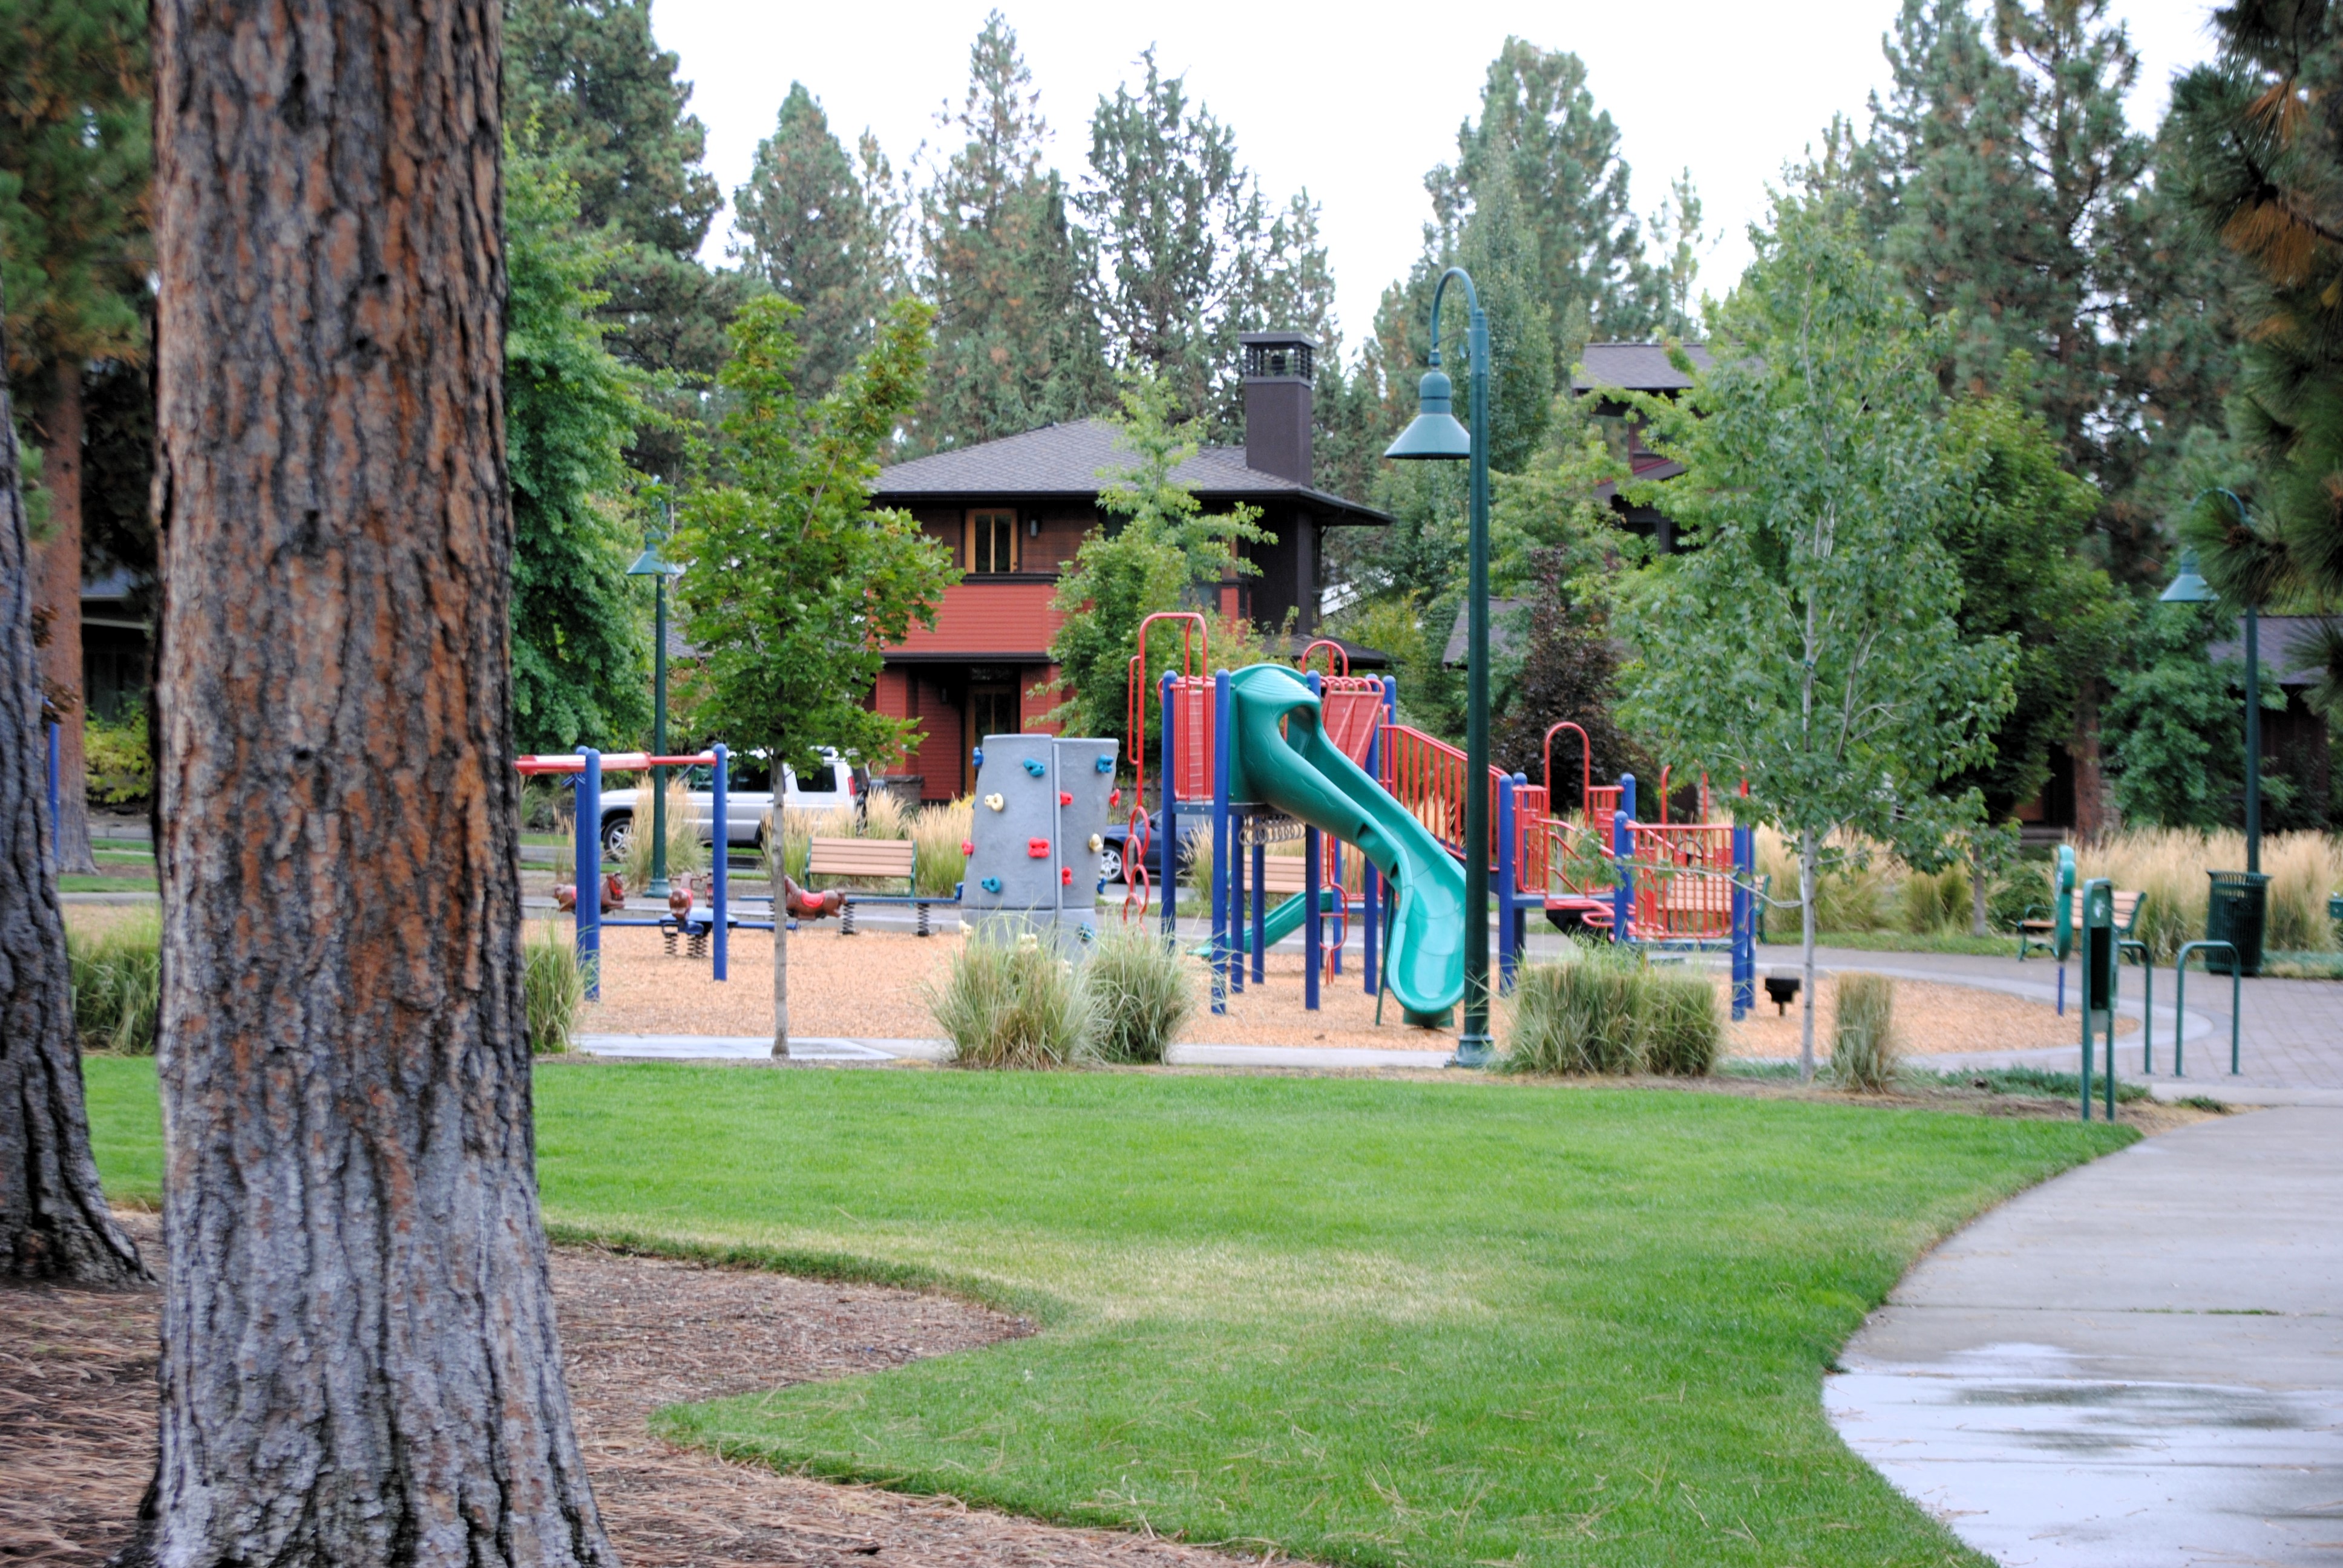 The playground at Lewis and Clark park